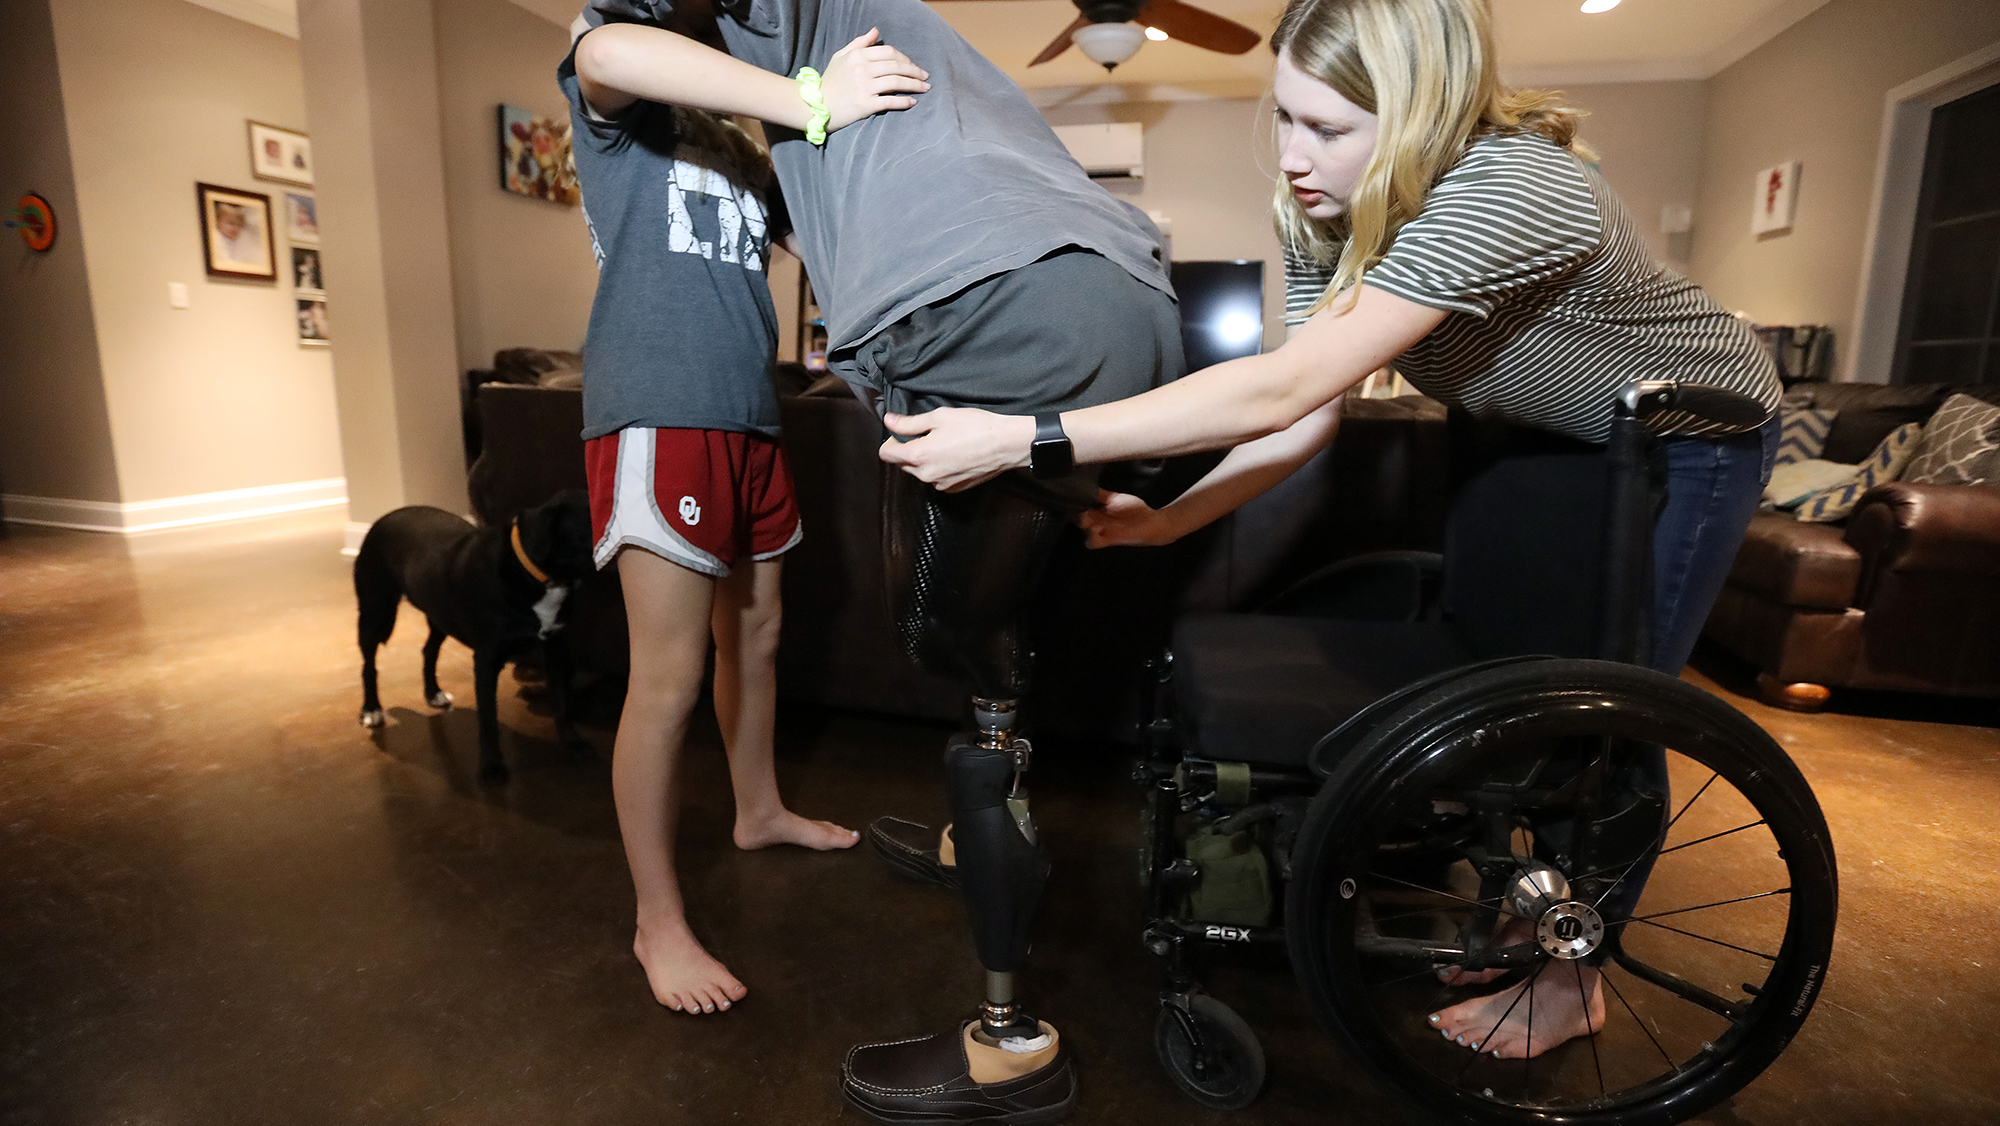 Deryn Allen and younger sister Ryann help their father, Chaz, a double amputee out of his wheelchair in McMinnville, TN. VINO WONG/SKY BLOSSOM FILMS